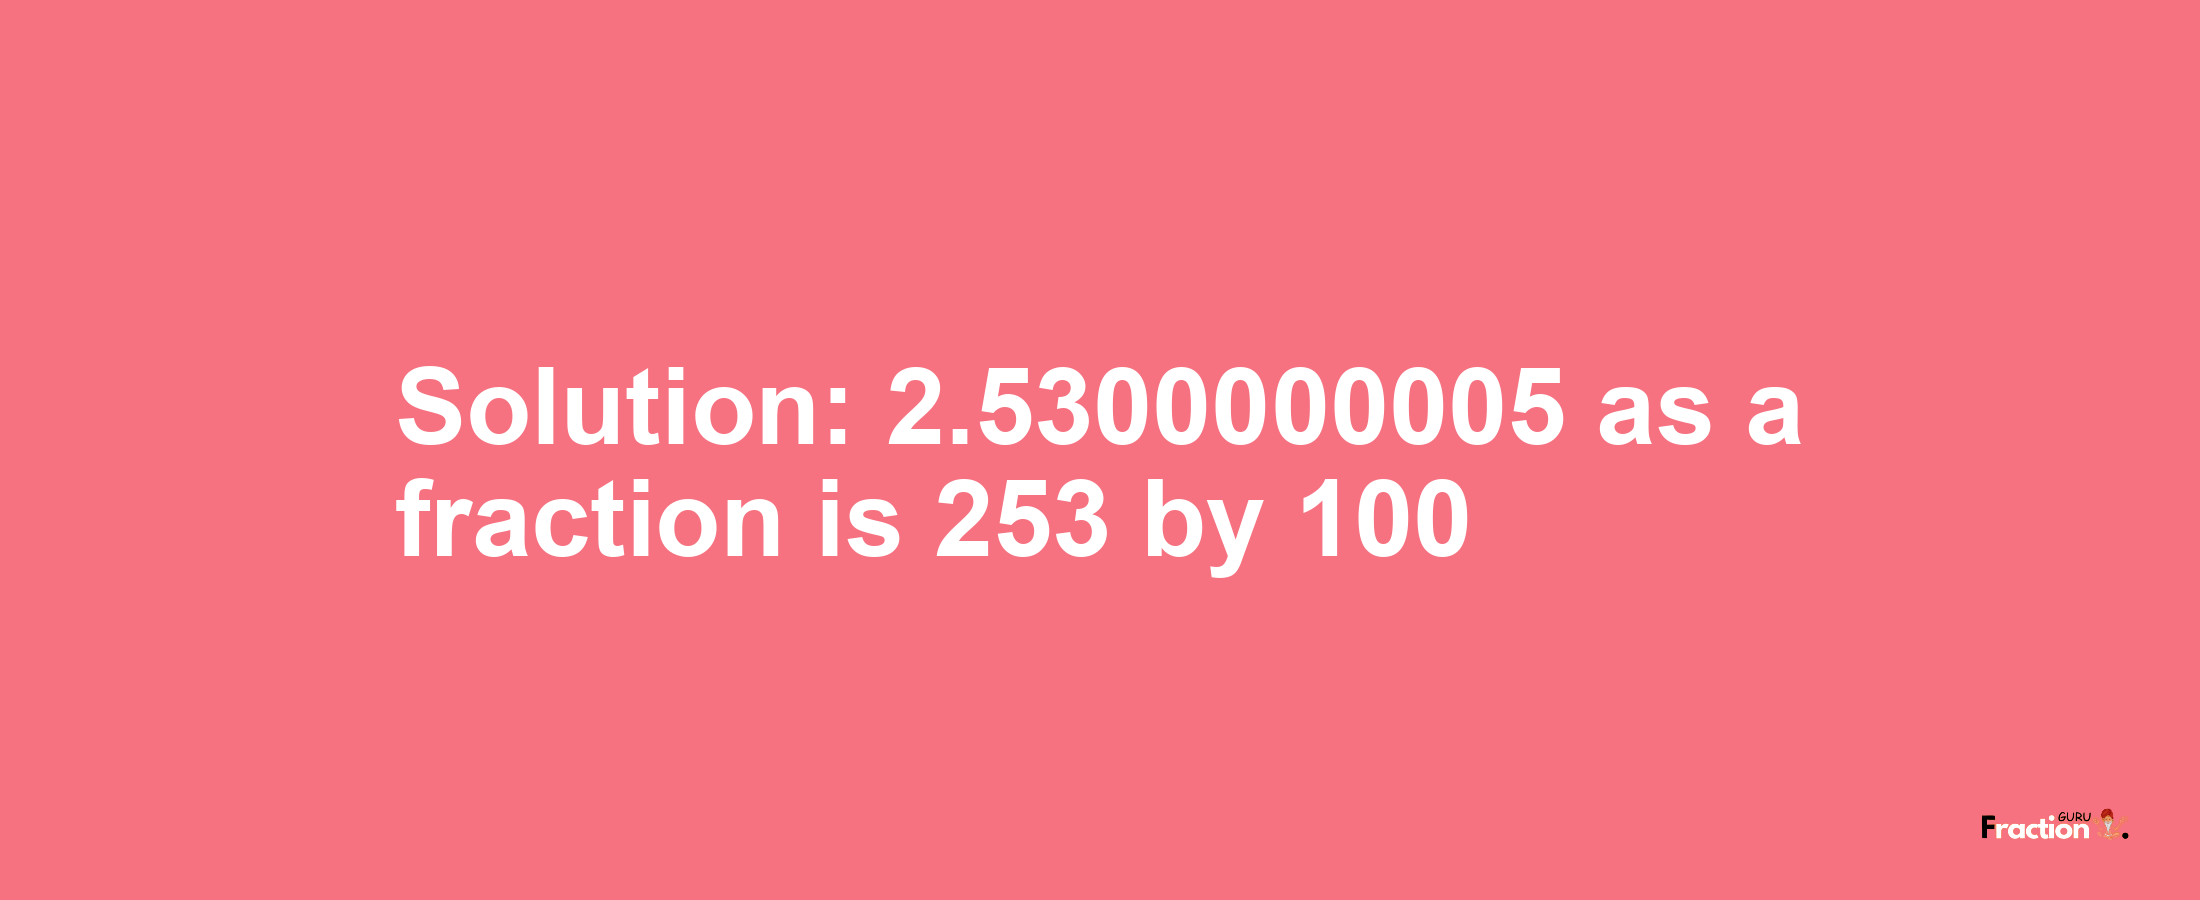 Solution:2.5300000005 as a fraction is 253/100